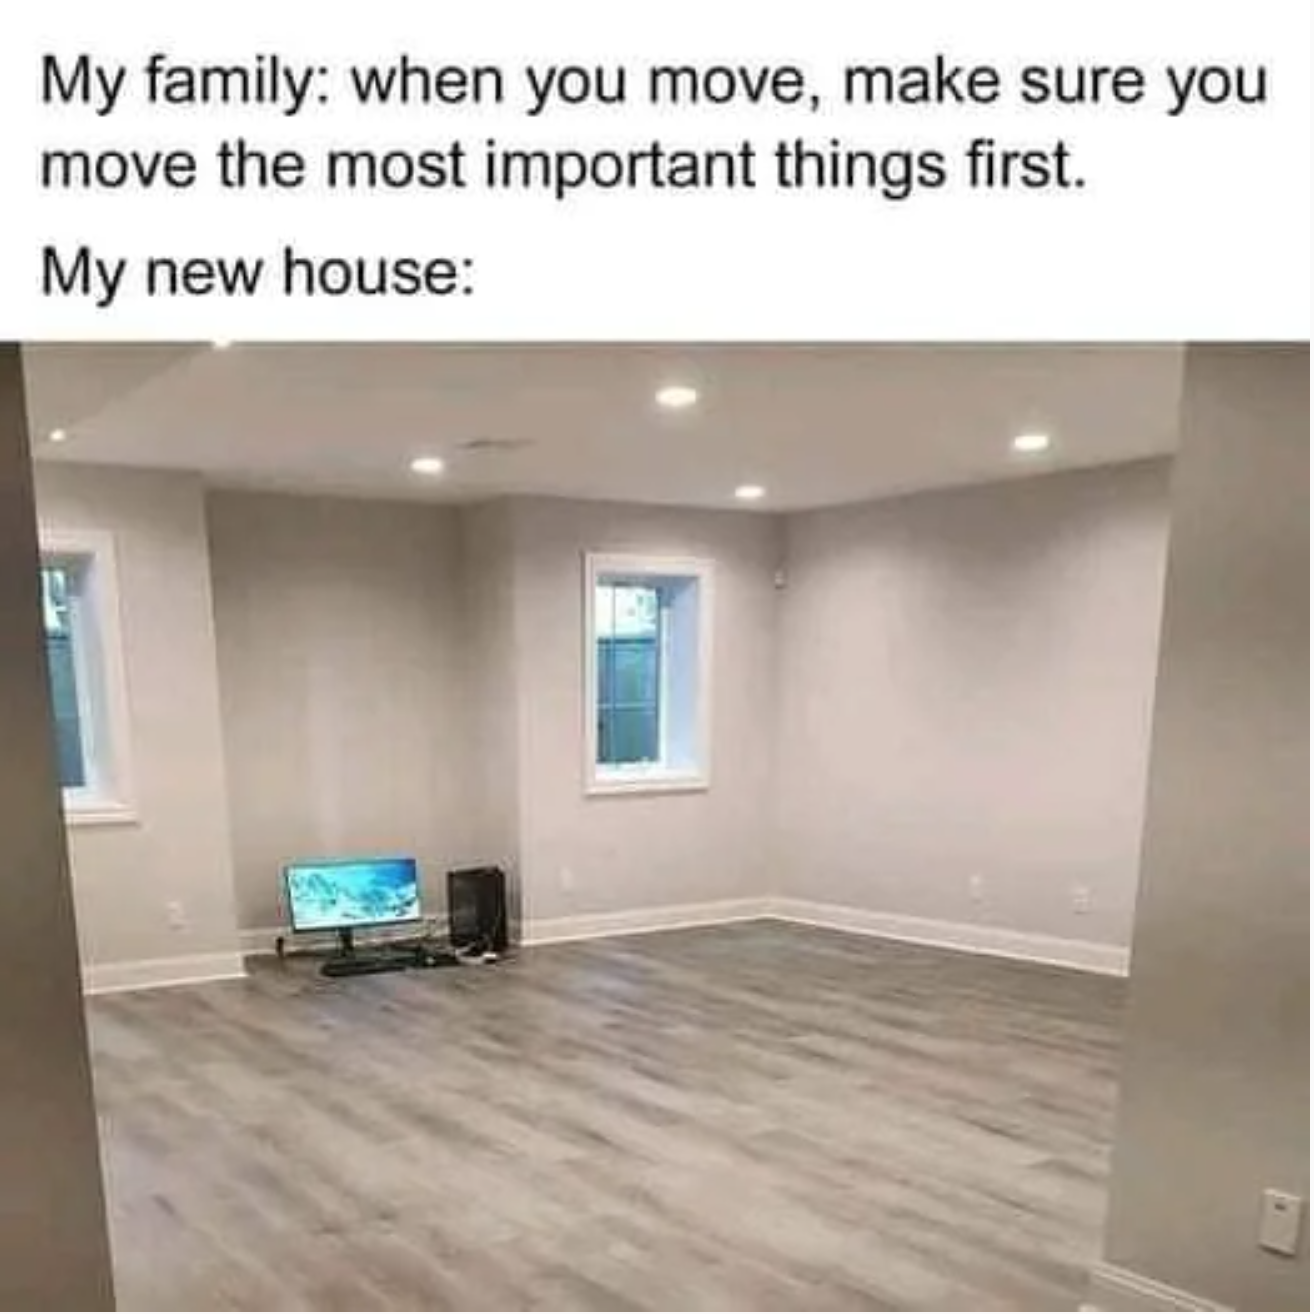 funny gaming memes - floor - My family when you move, make sure you move the most important things first. My new house